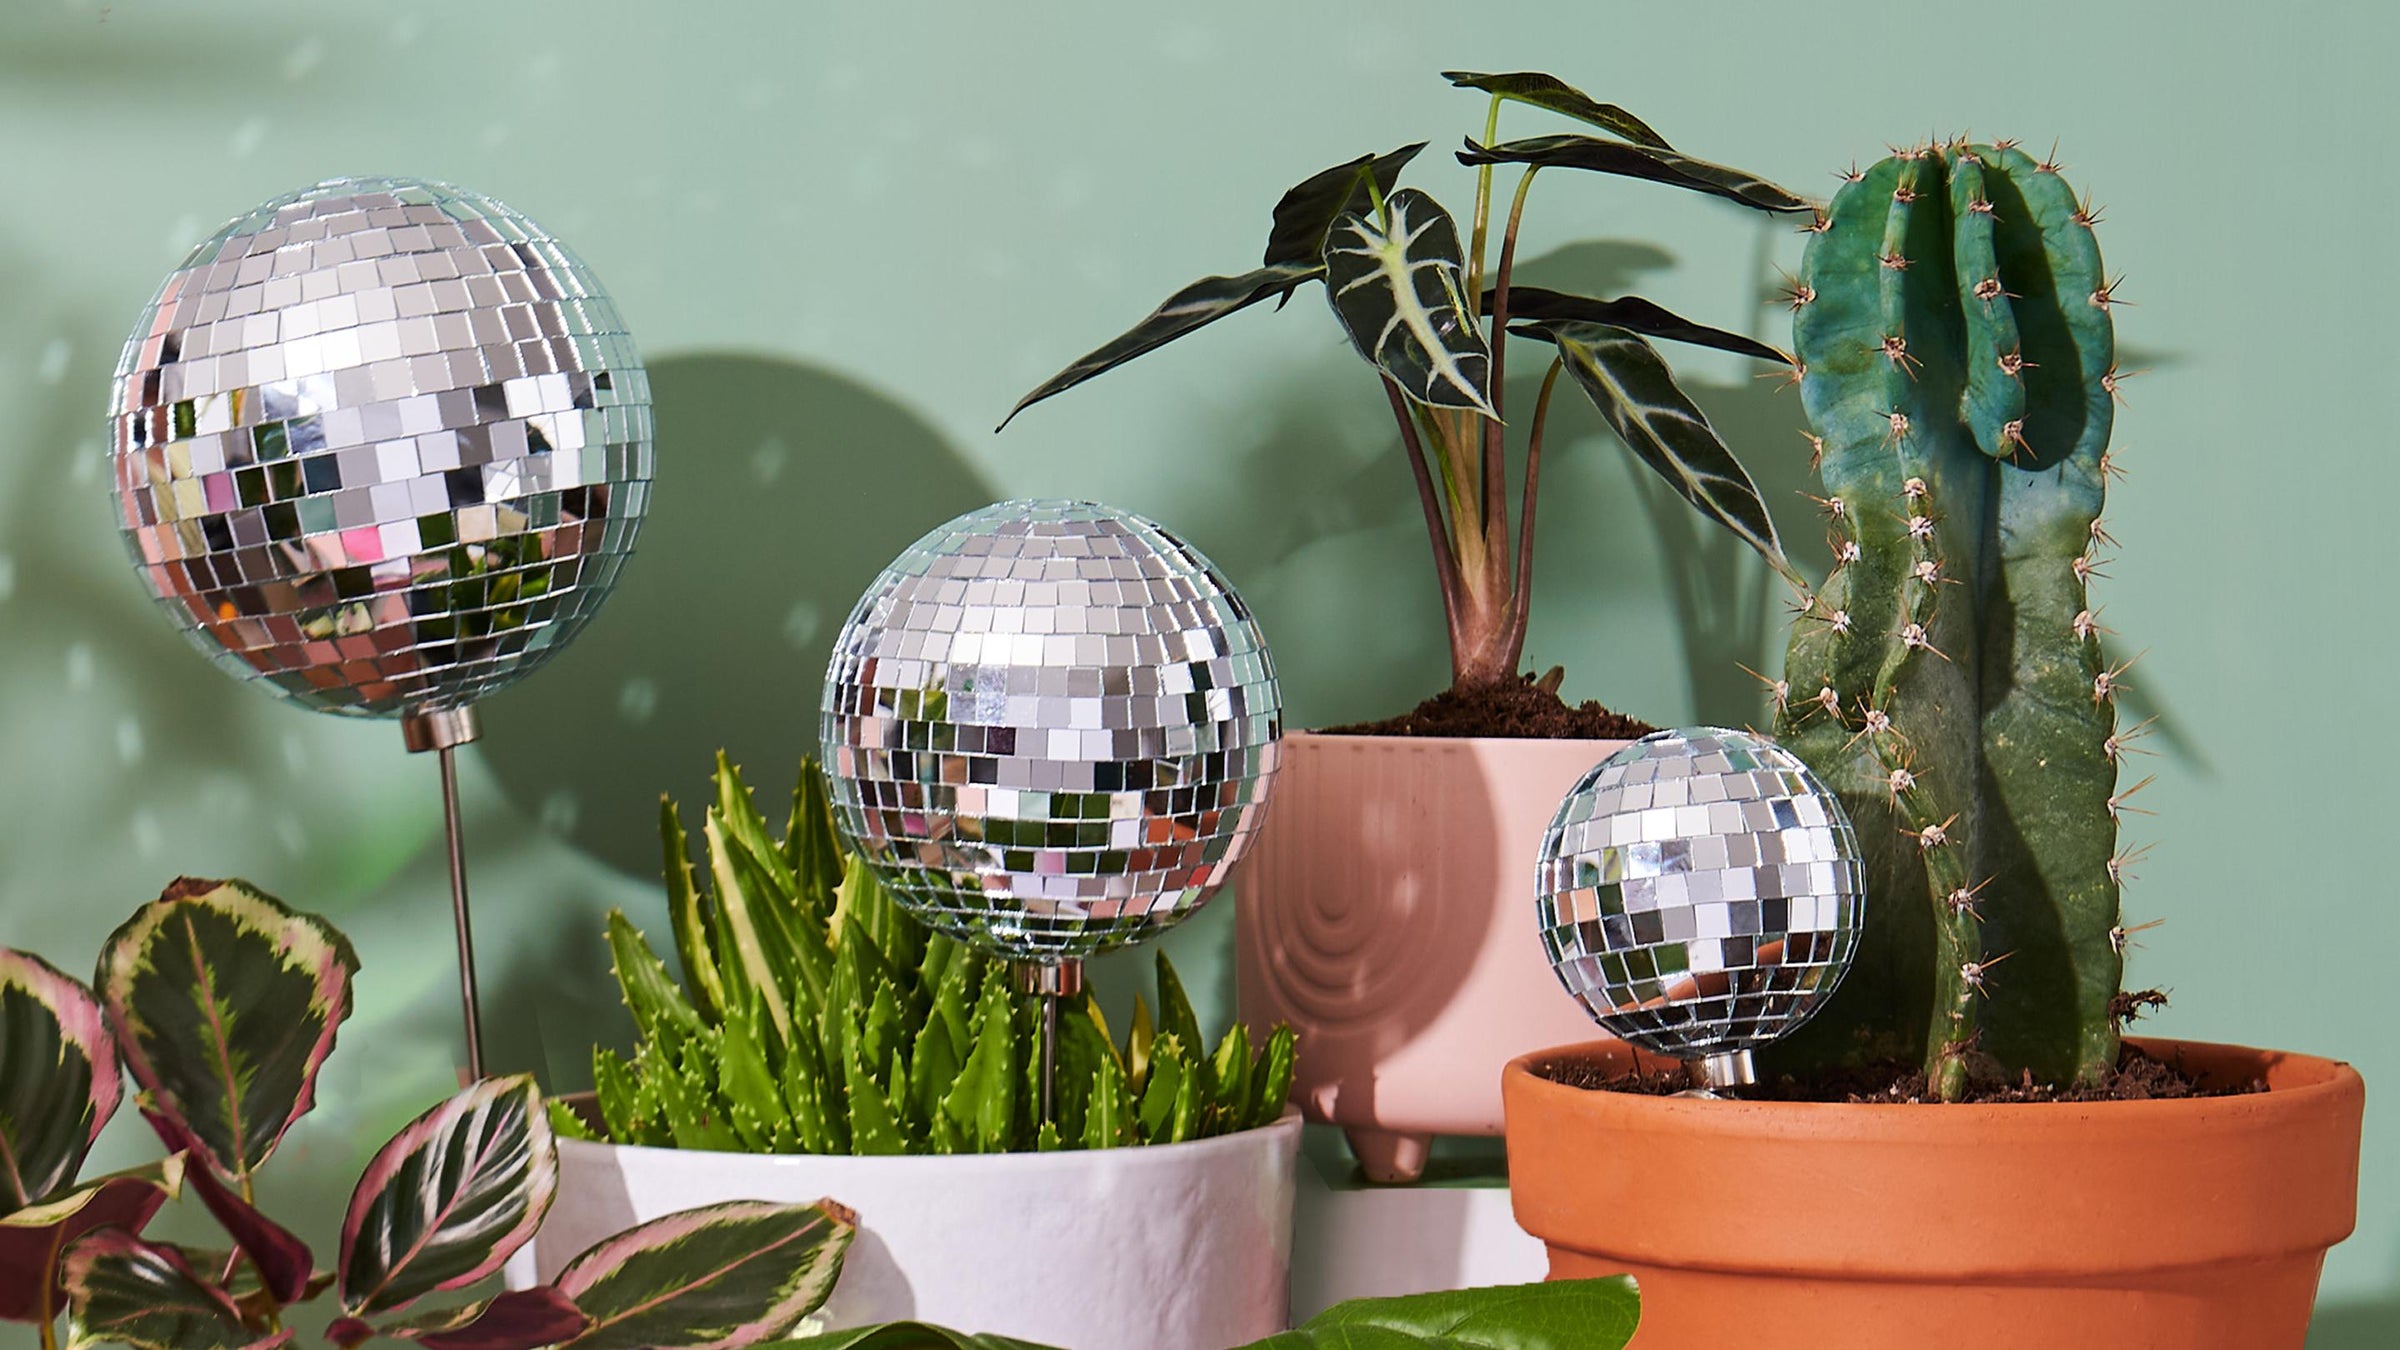 Paloverde's collection of disco ball plant stakes in various sizes placed in modern potted houseplants